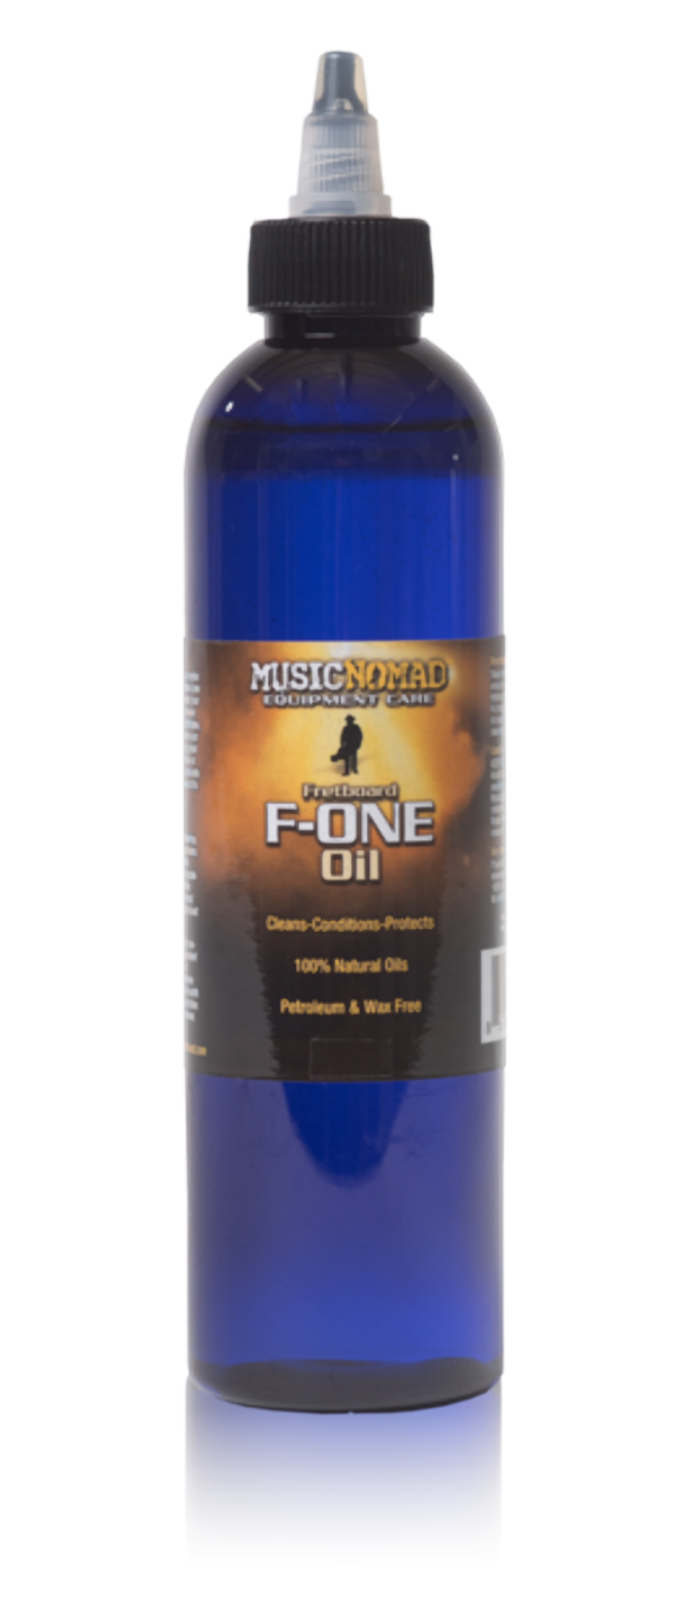 Music Nomad Fretboard F-ONE Oil Cleaner & Conditioner 8 oz.